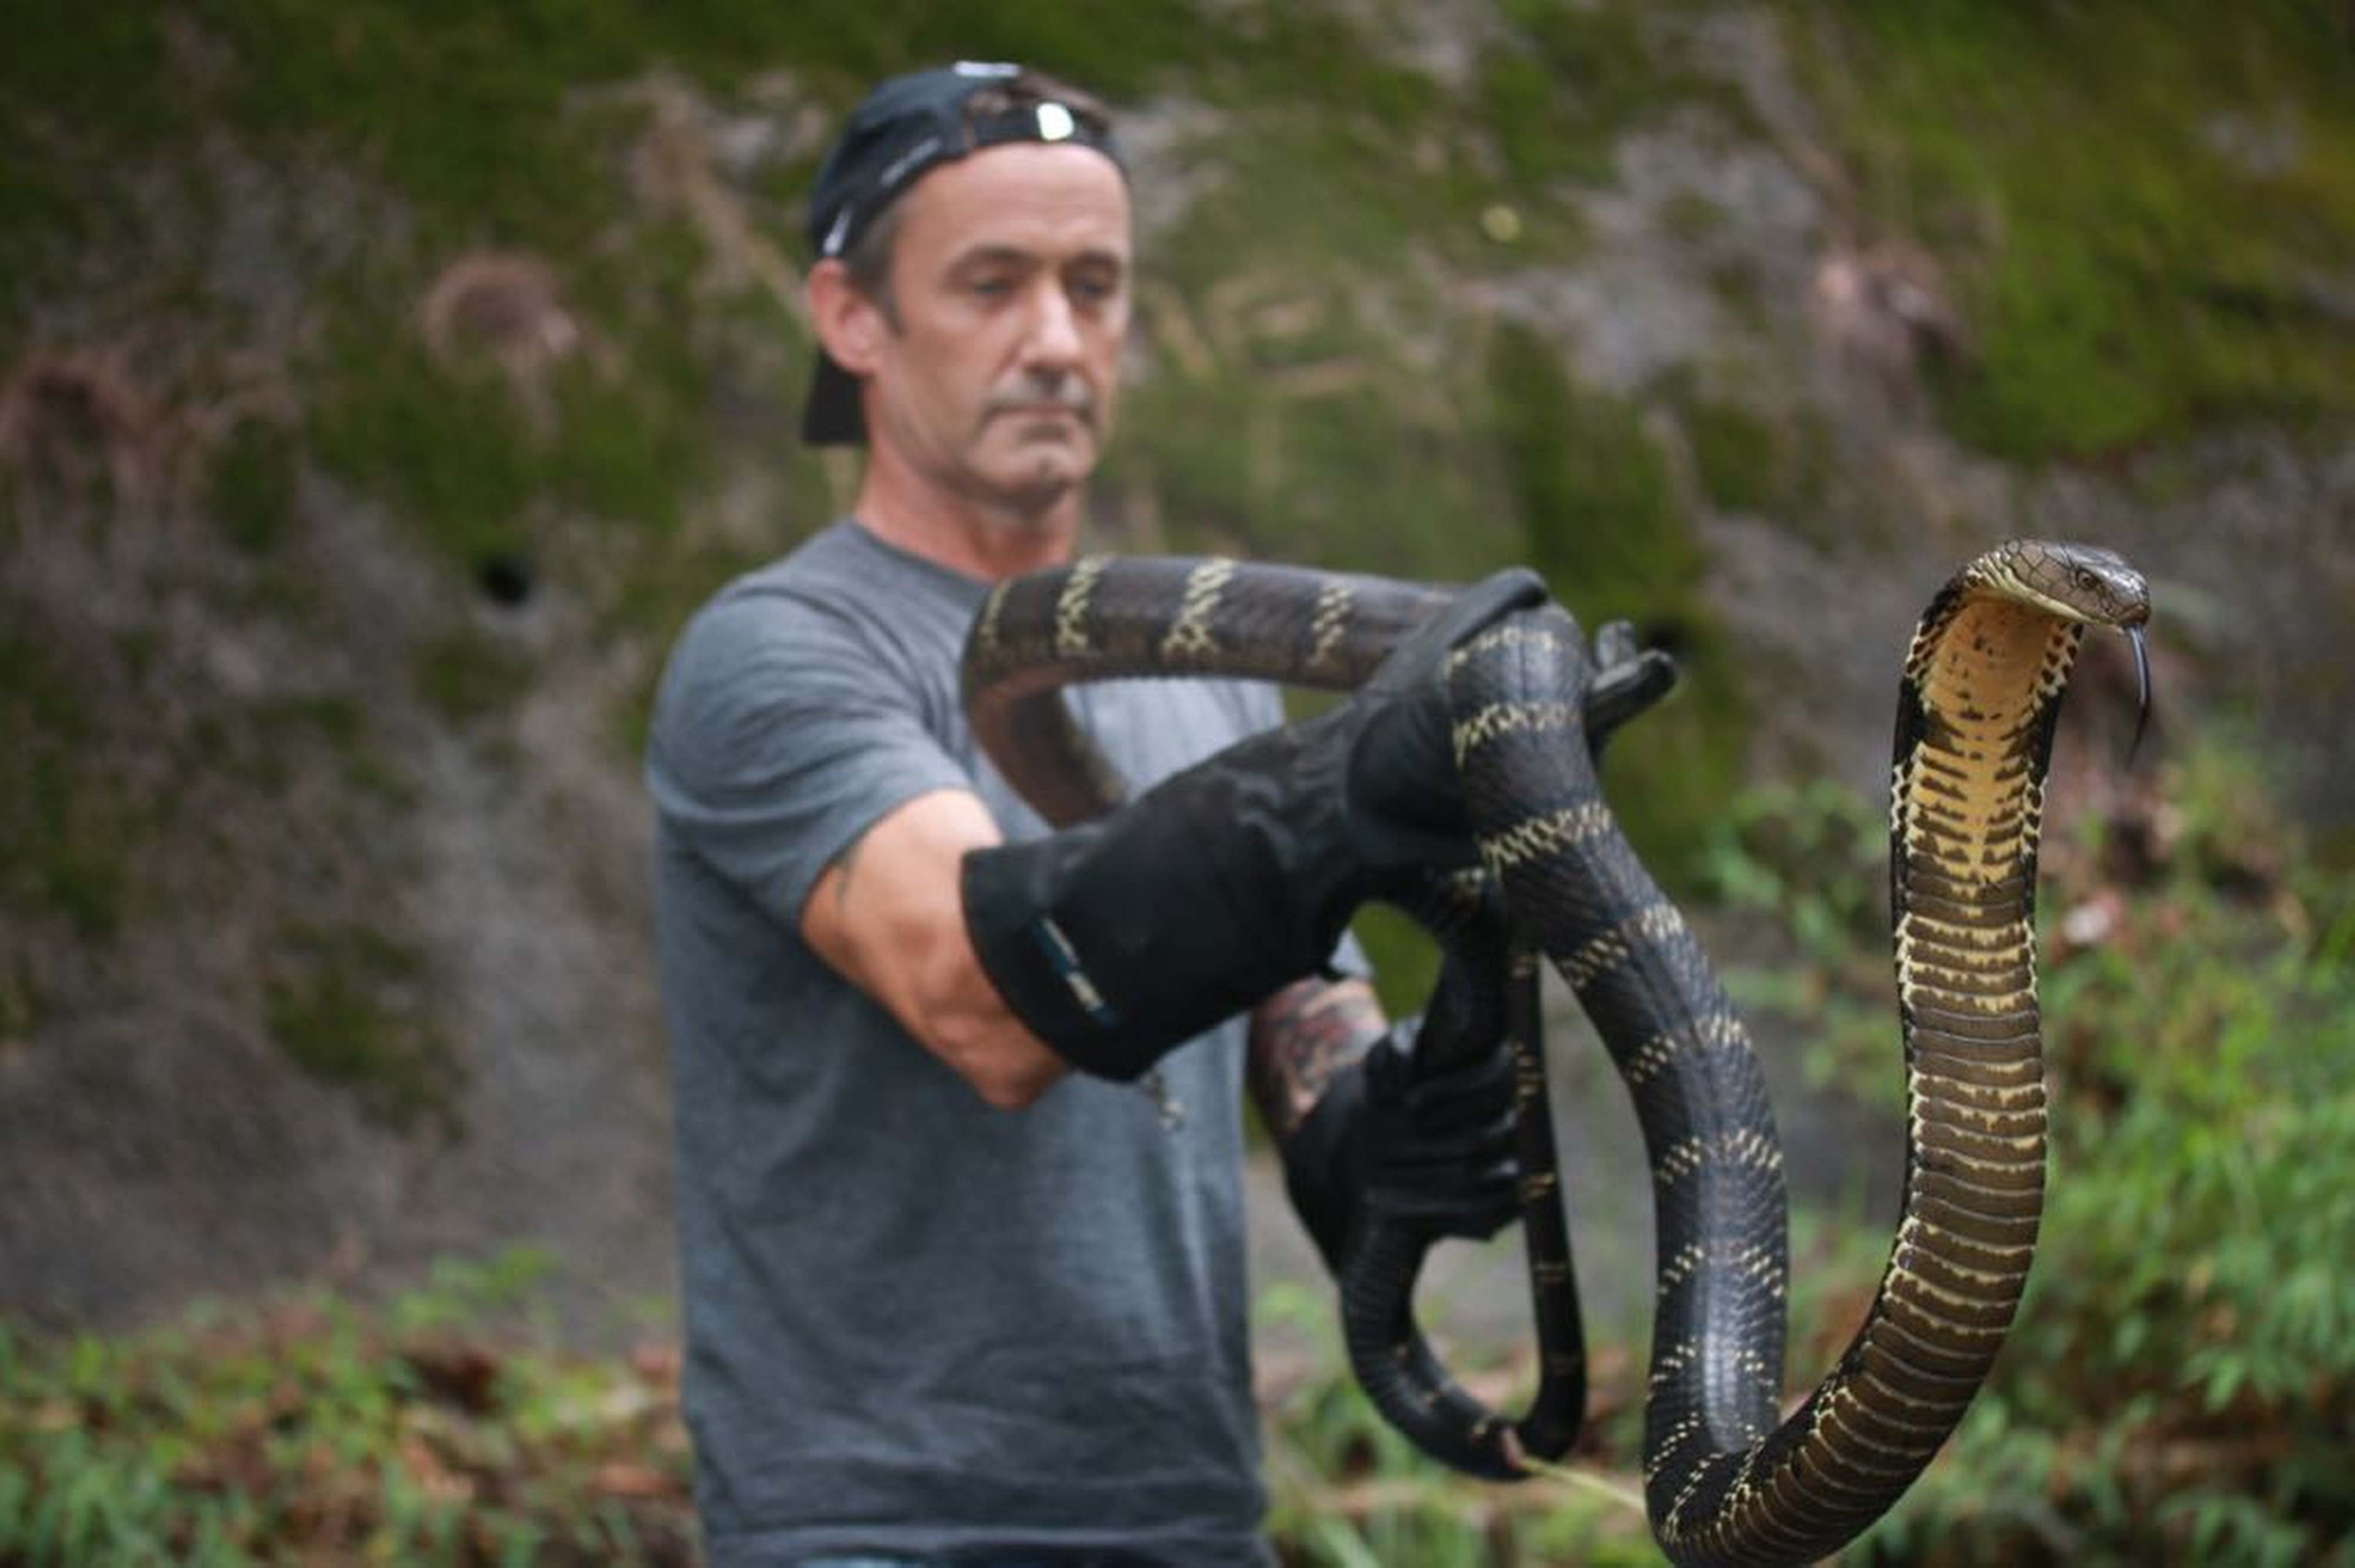 Experienced catcher says he plans to be more careful after Chinese cobra bite costs him part of his finger